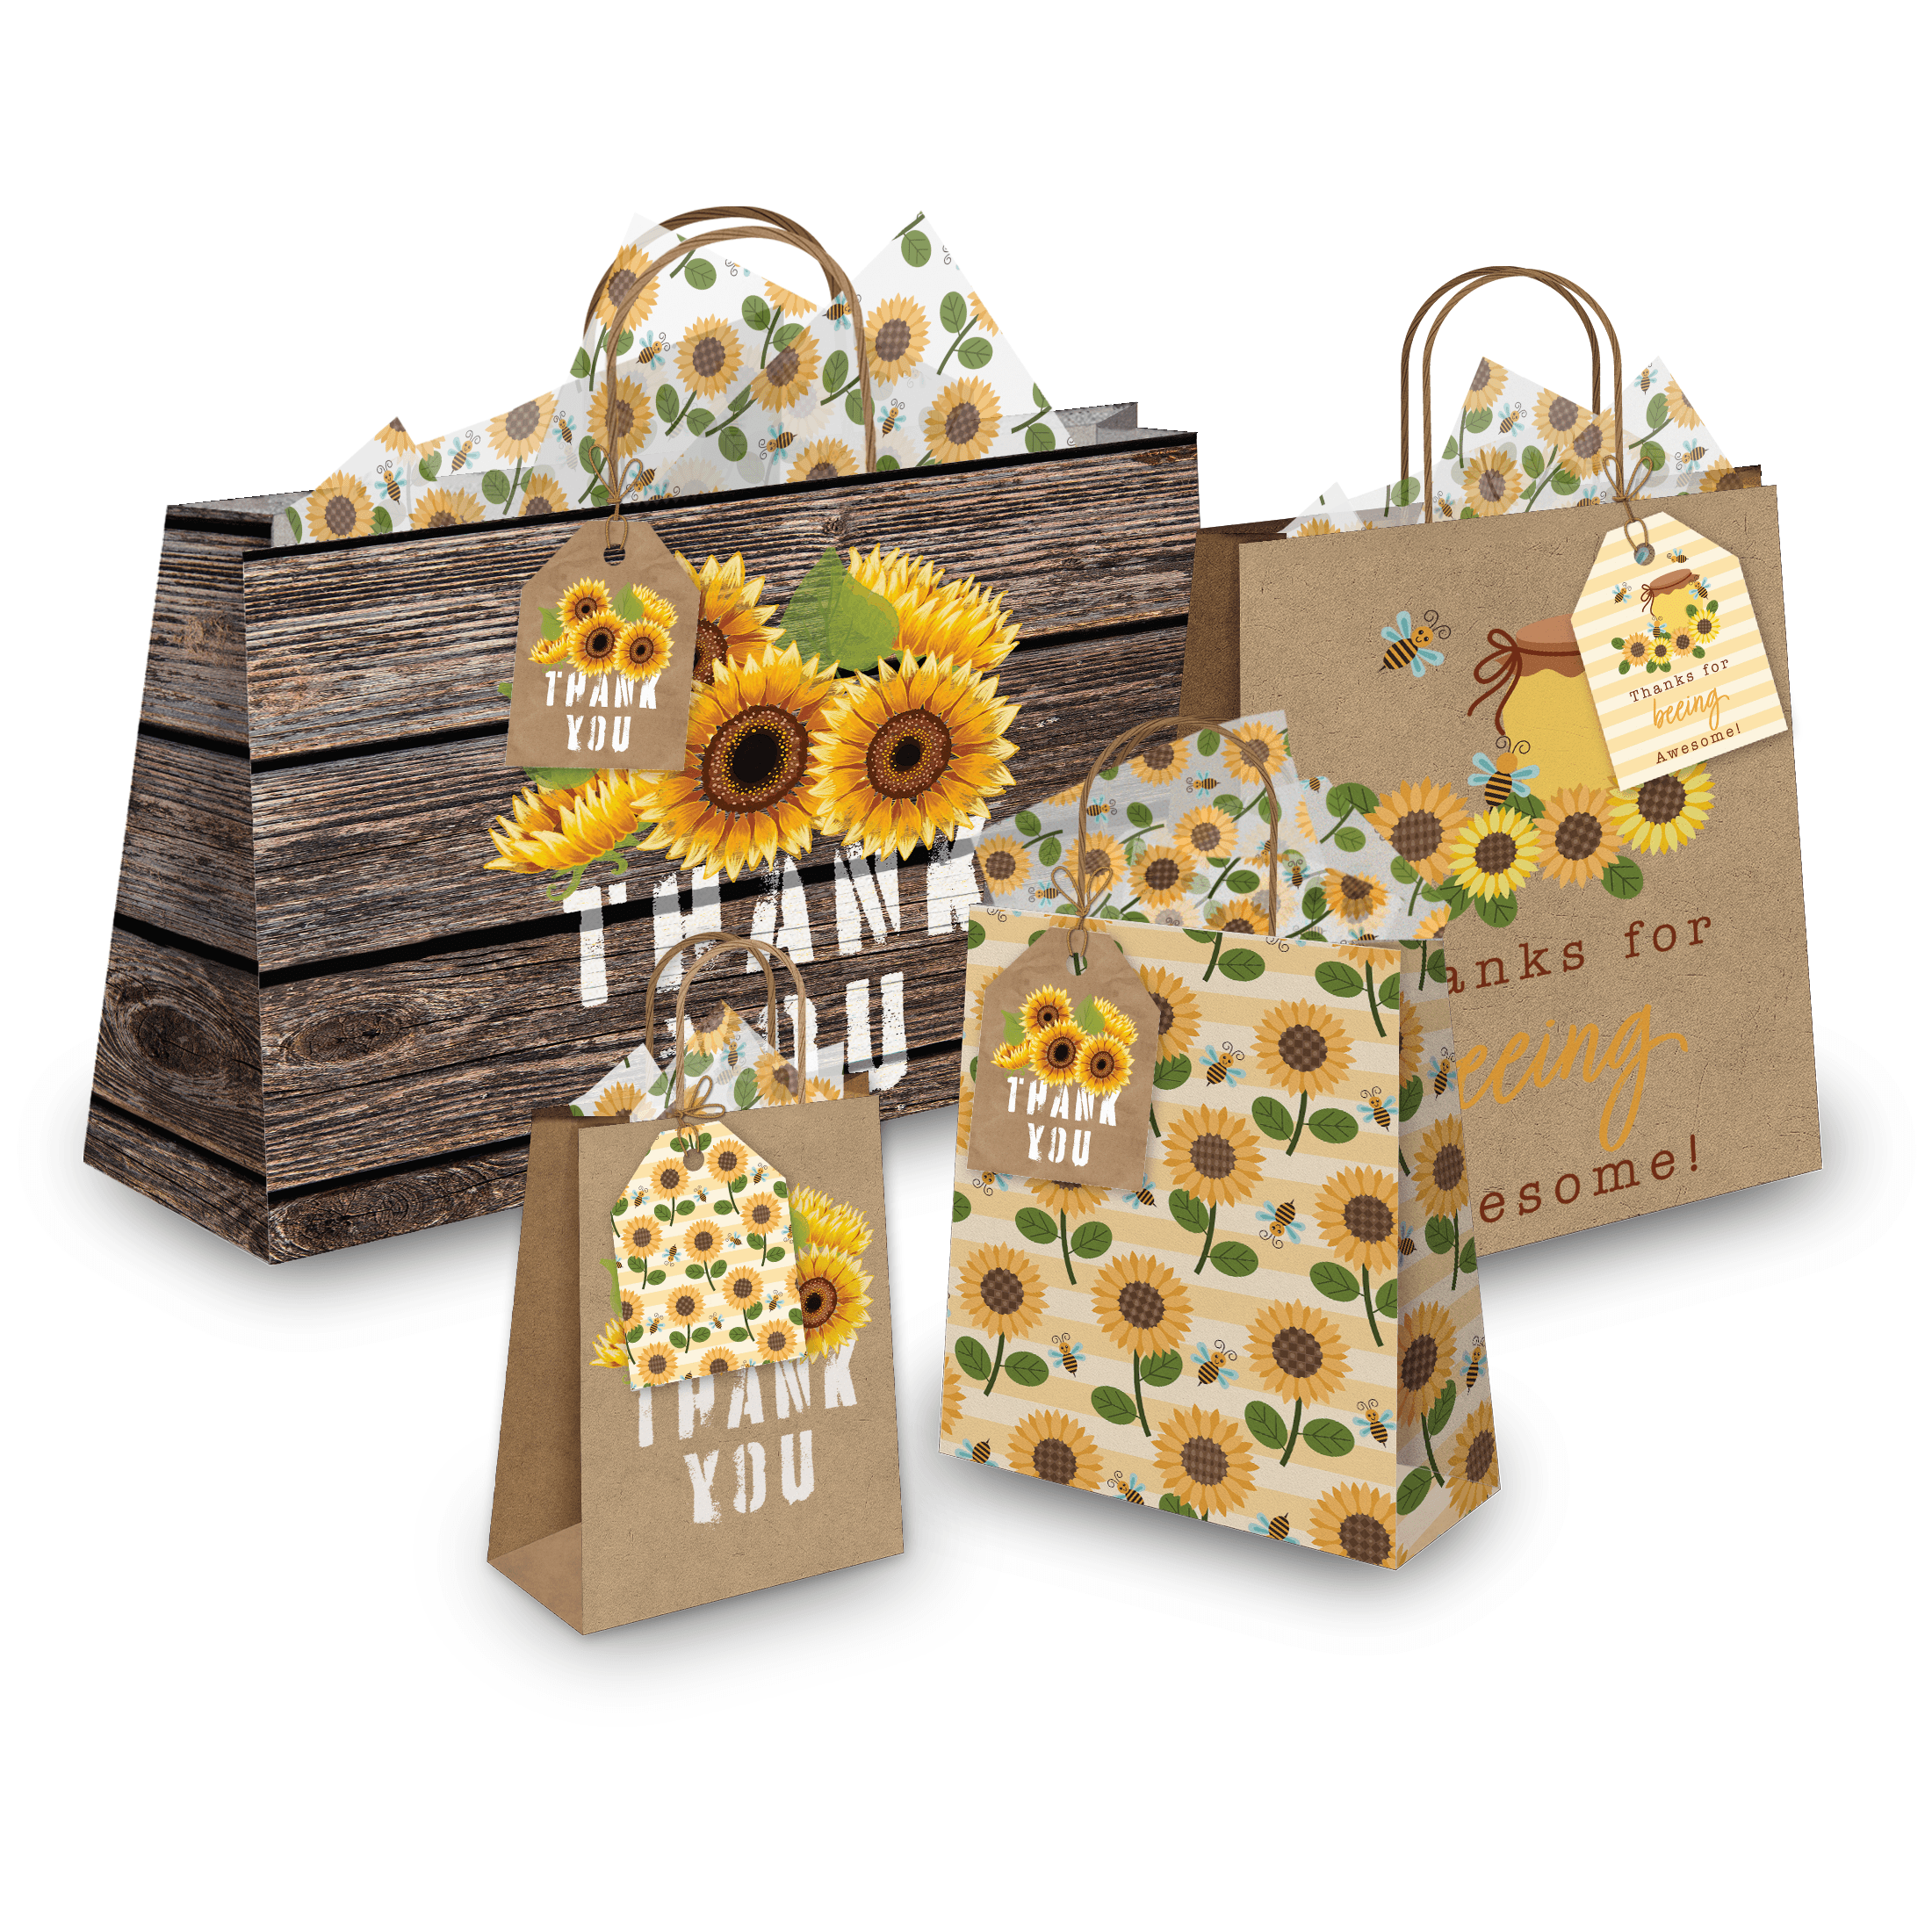 Sunflowers Assortment Gift Tags - Pro Supply Global